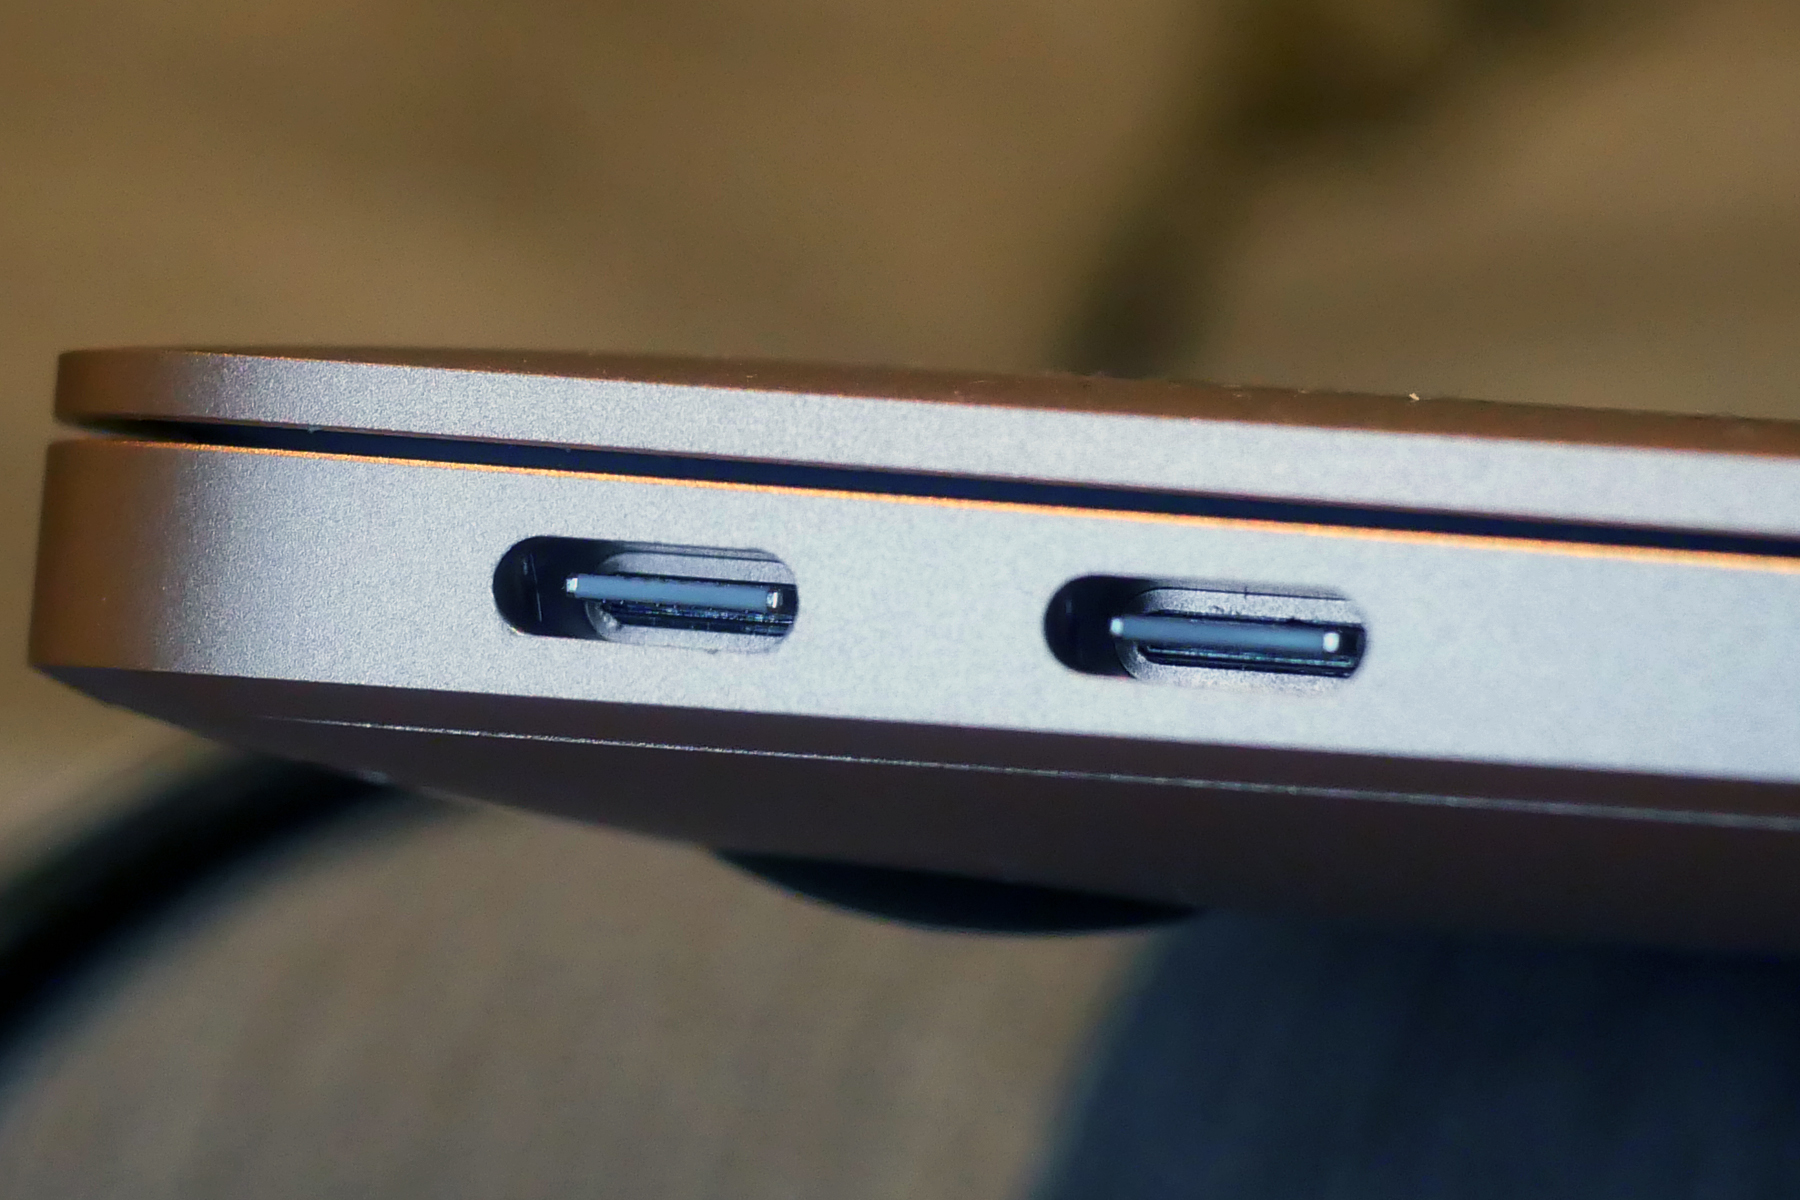 USB-C ports are commonly called ‘Android chargers’ but this is incorrect. They’re found not just on most Android devices released in the past two to three years, but also all iPad Pros made since 2018, iPhones starting with the iPhone 15 lineup introduced in 2023, Nintendo Switch consoles, many new laptops, the latest wireless headphones and power banks.